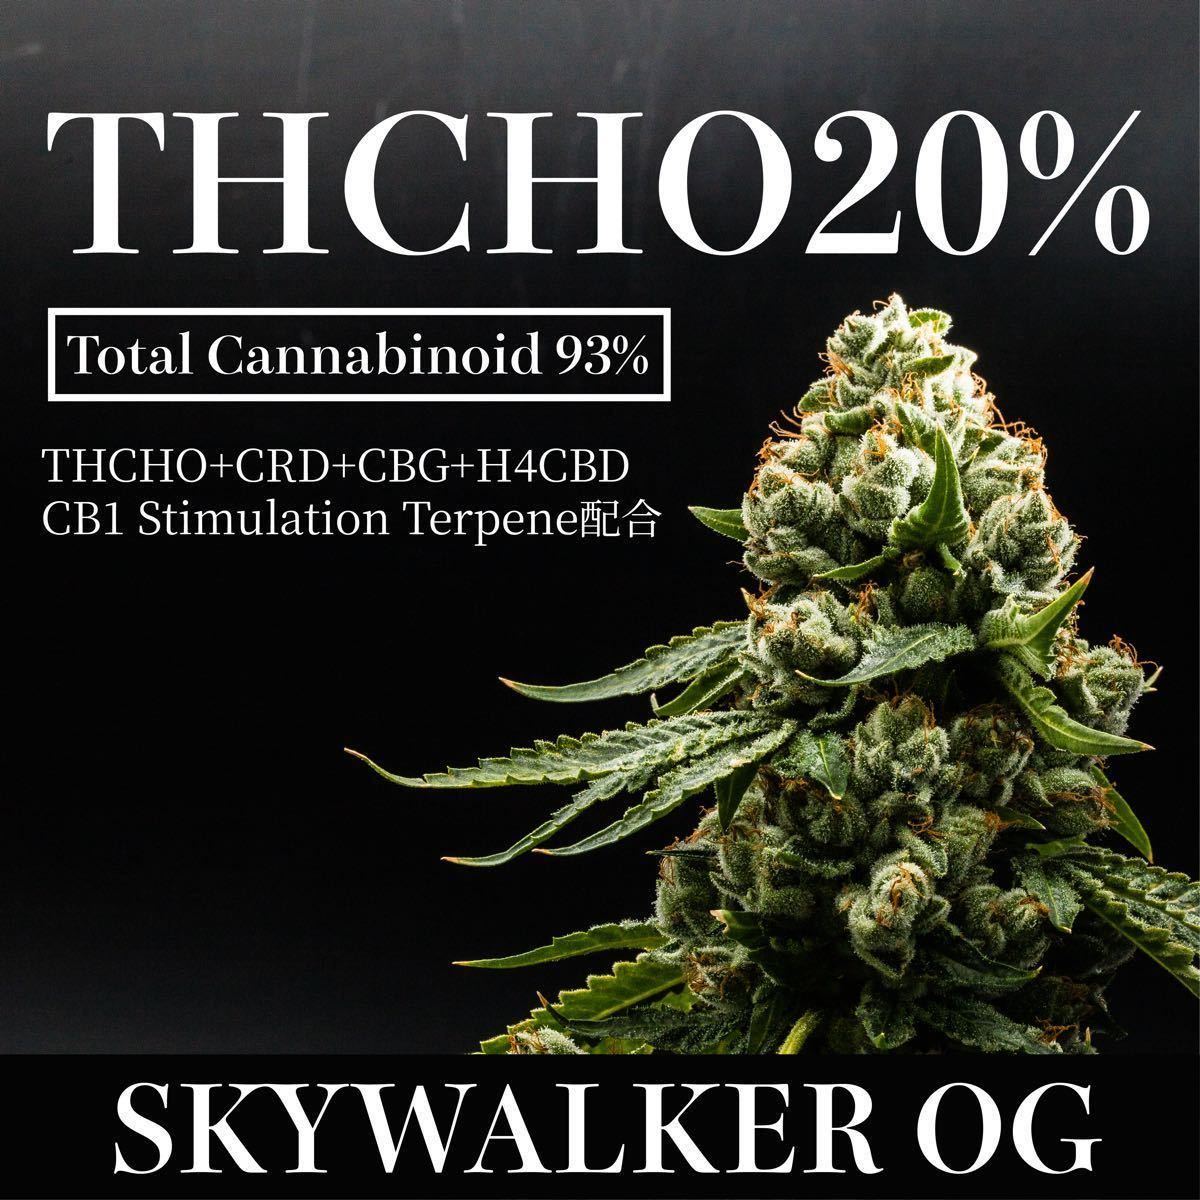 D9-THCHO 20% 1ml OGKUSH受容体刺激テルペン配合｜PayPayフリマ